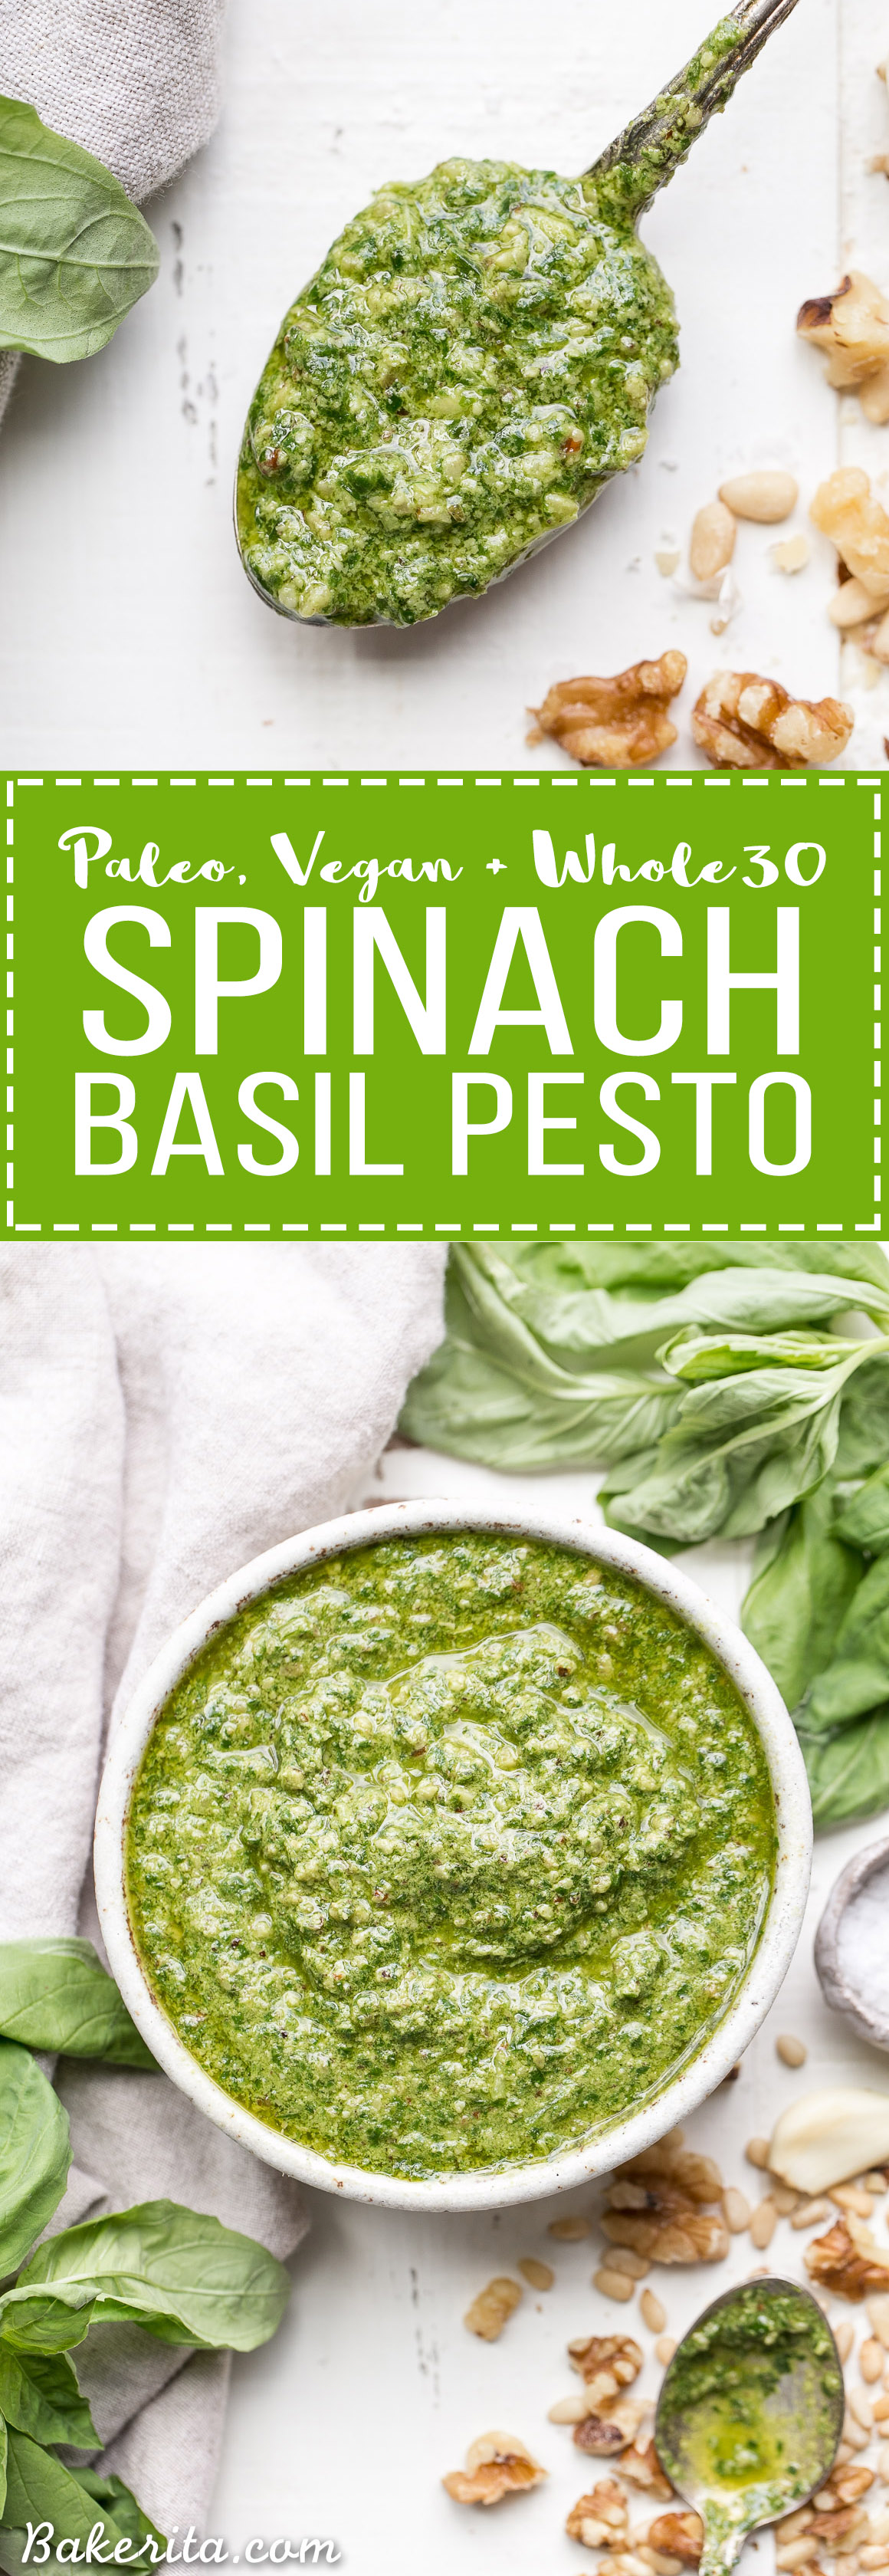 This Spinach Basil Pesto is loaded with bright herby flavor and made in just a few minutes. You won't miss the cheese in this paleo, vegan, Whole30-friendly & keto pesto. It will make any meal more flavorful, whether it's tossed with pasta, enjoyed with your favorite protein, or used as a spread.